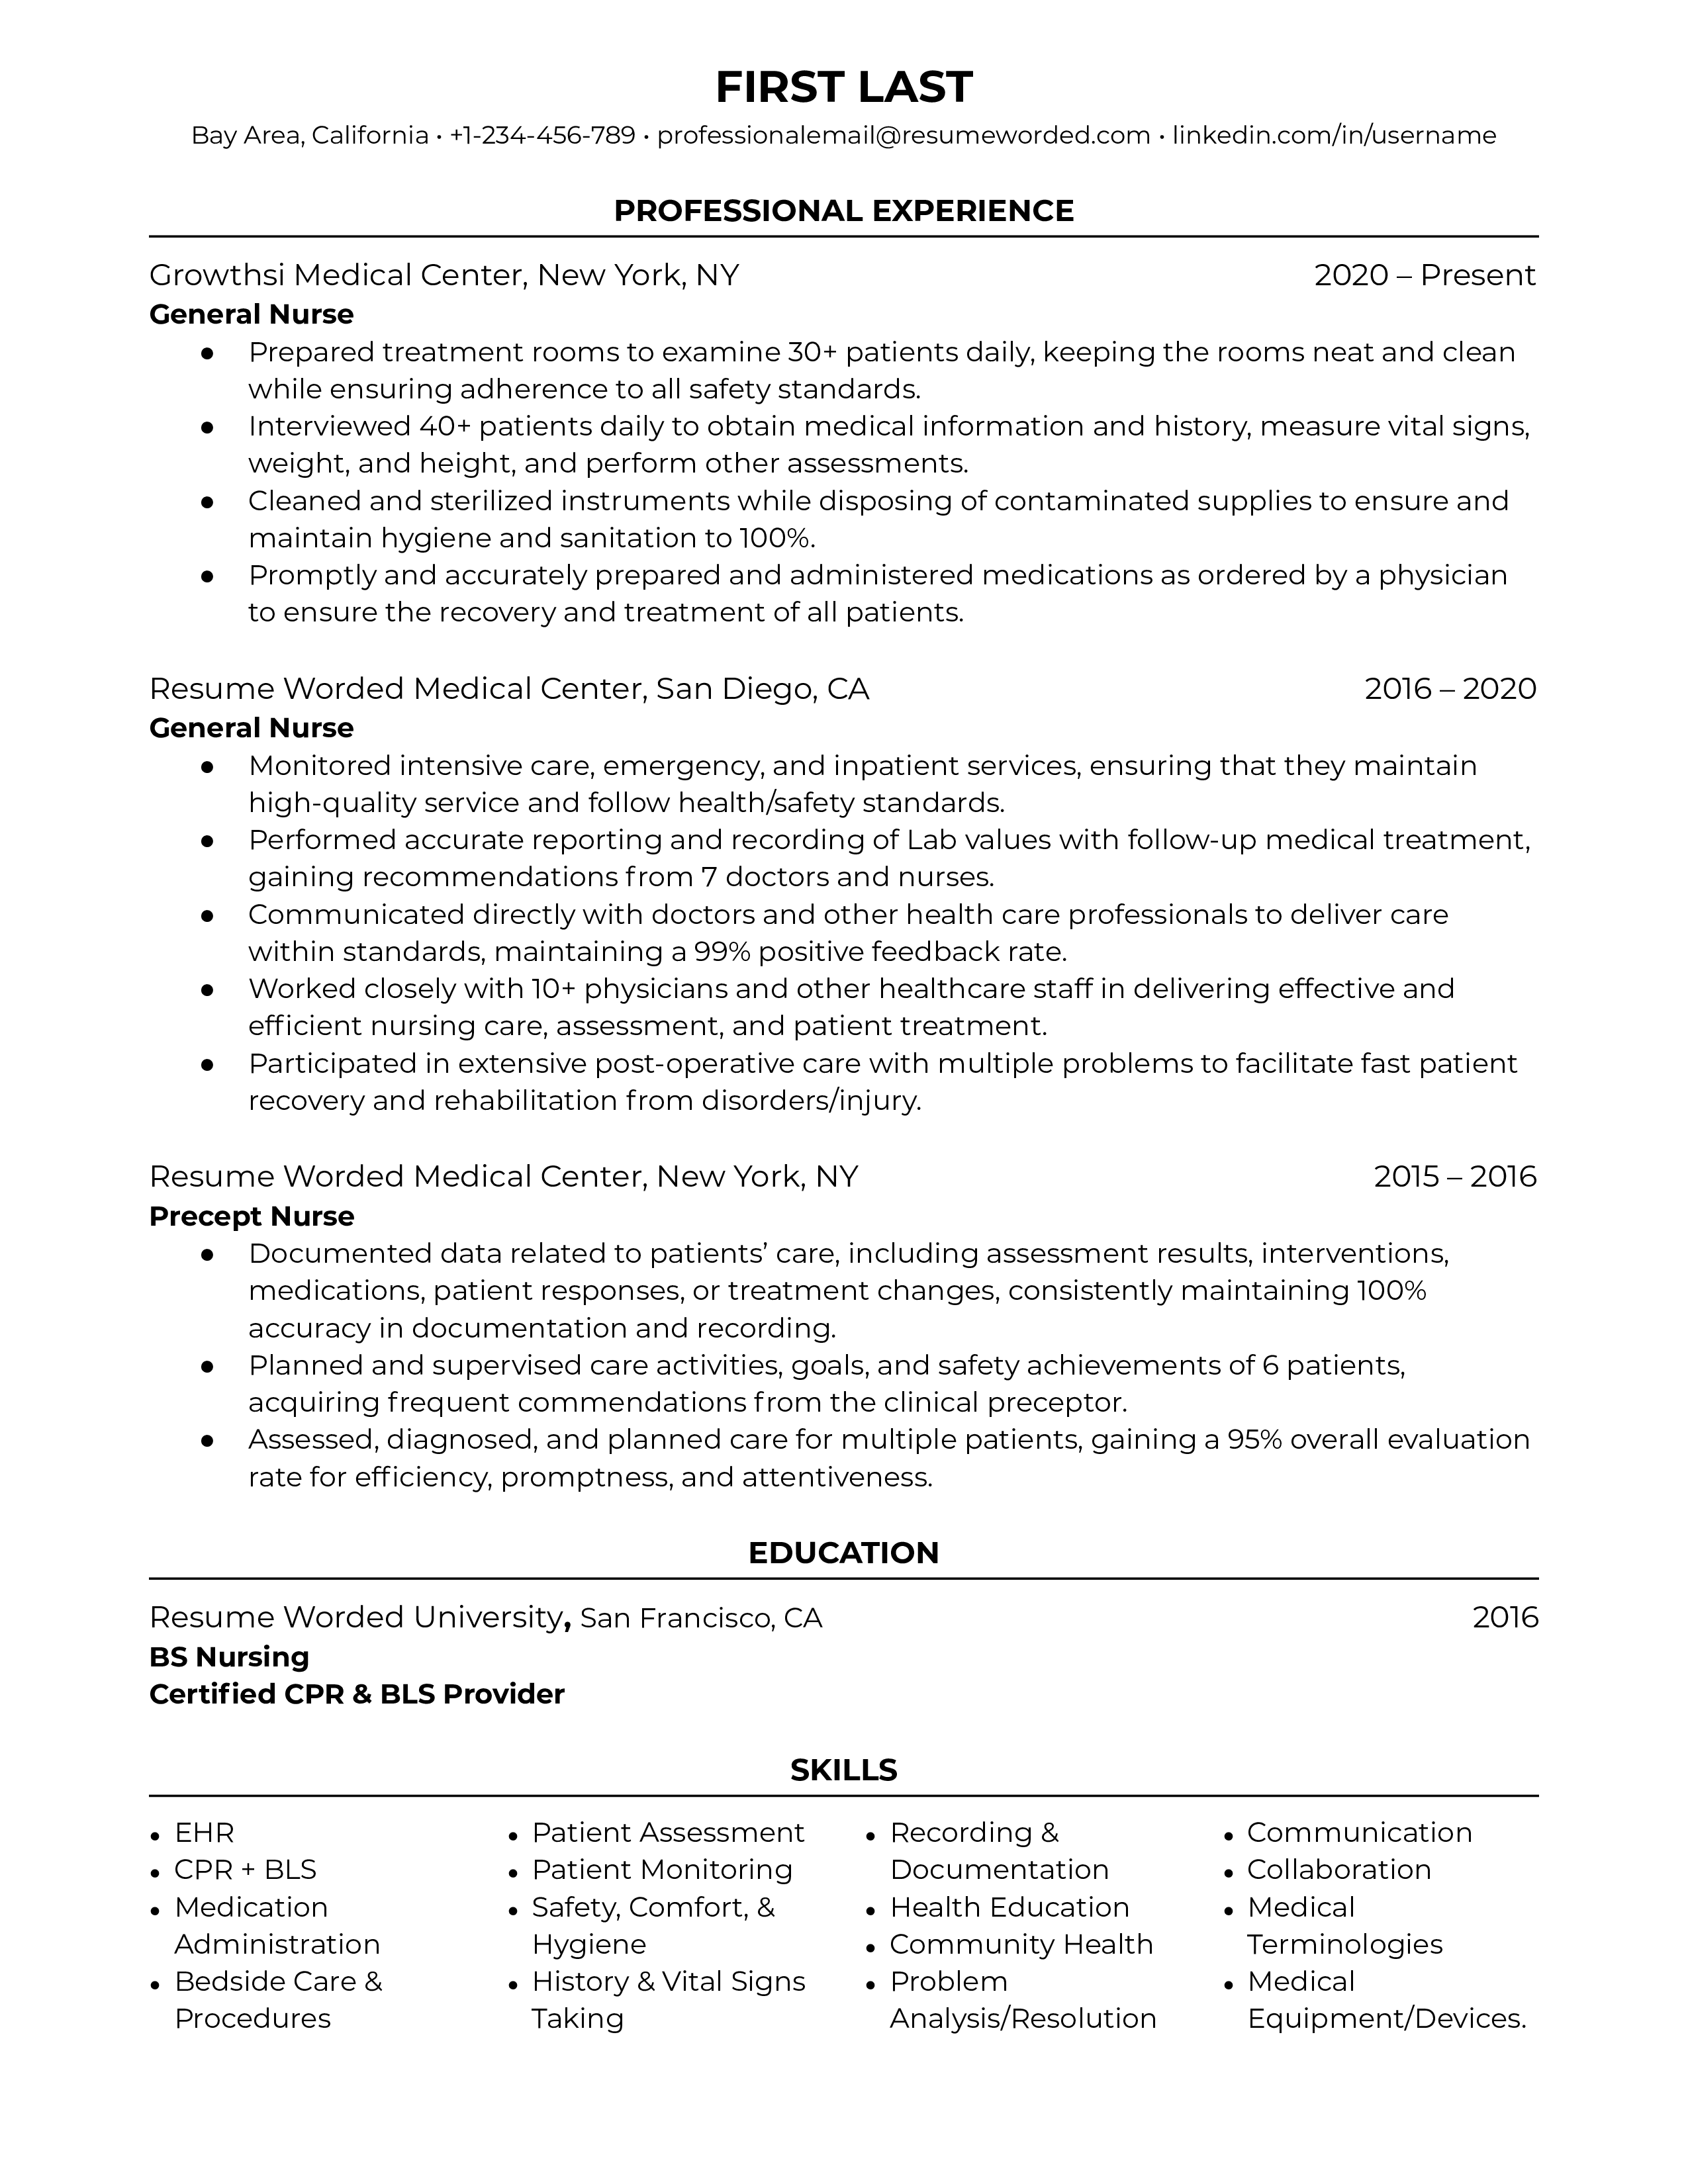 General nurse resume template sample listing appropriate skills and qualifications